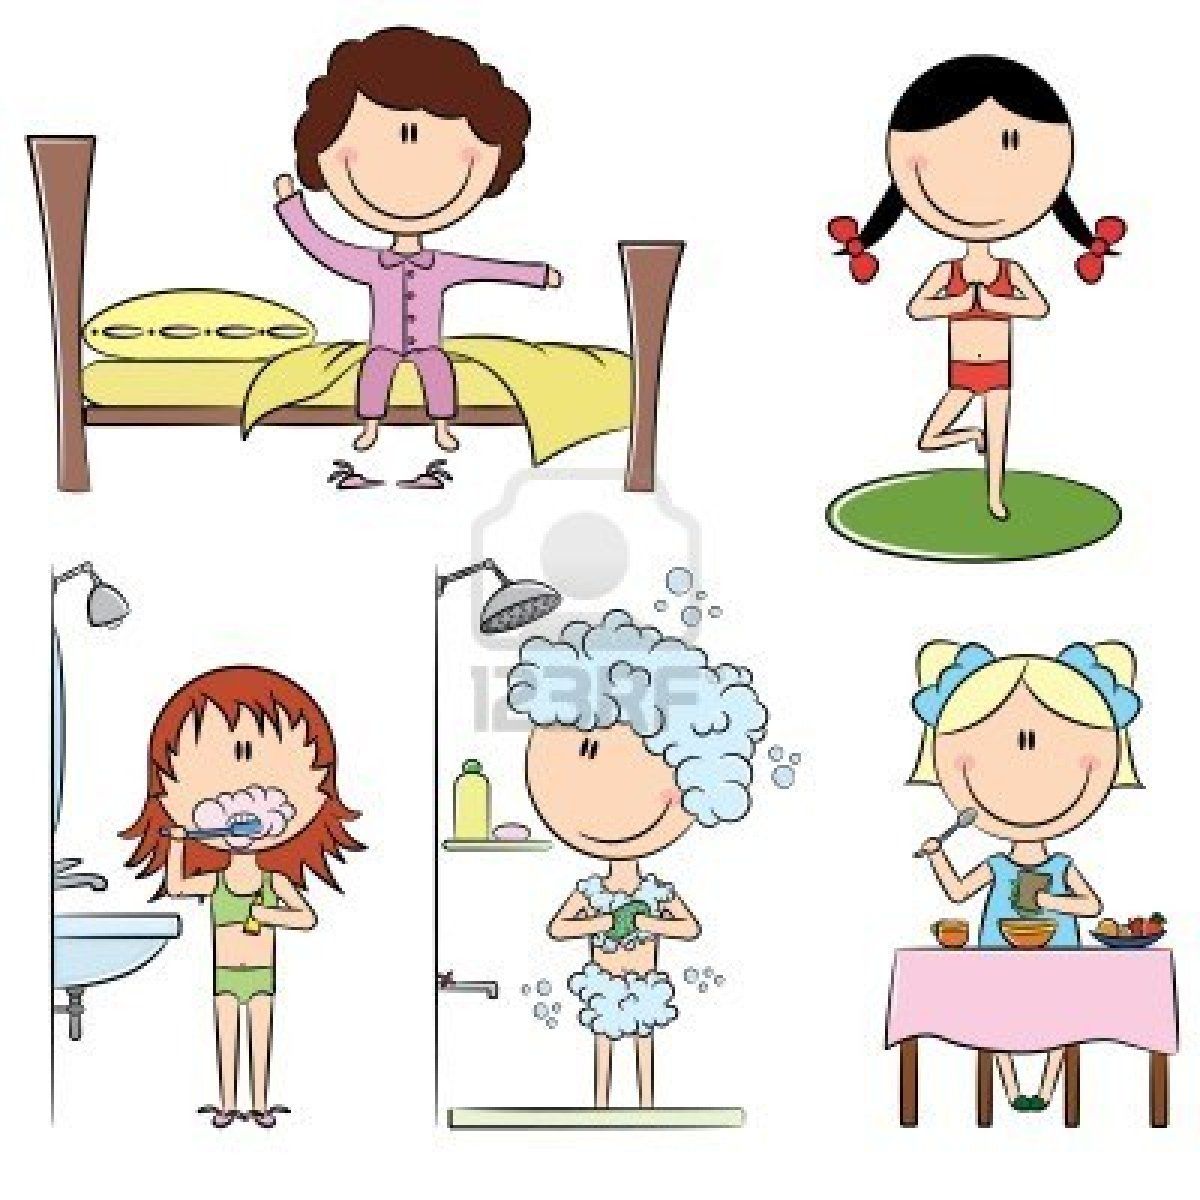 showering clipart daily